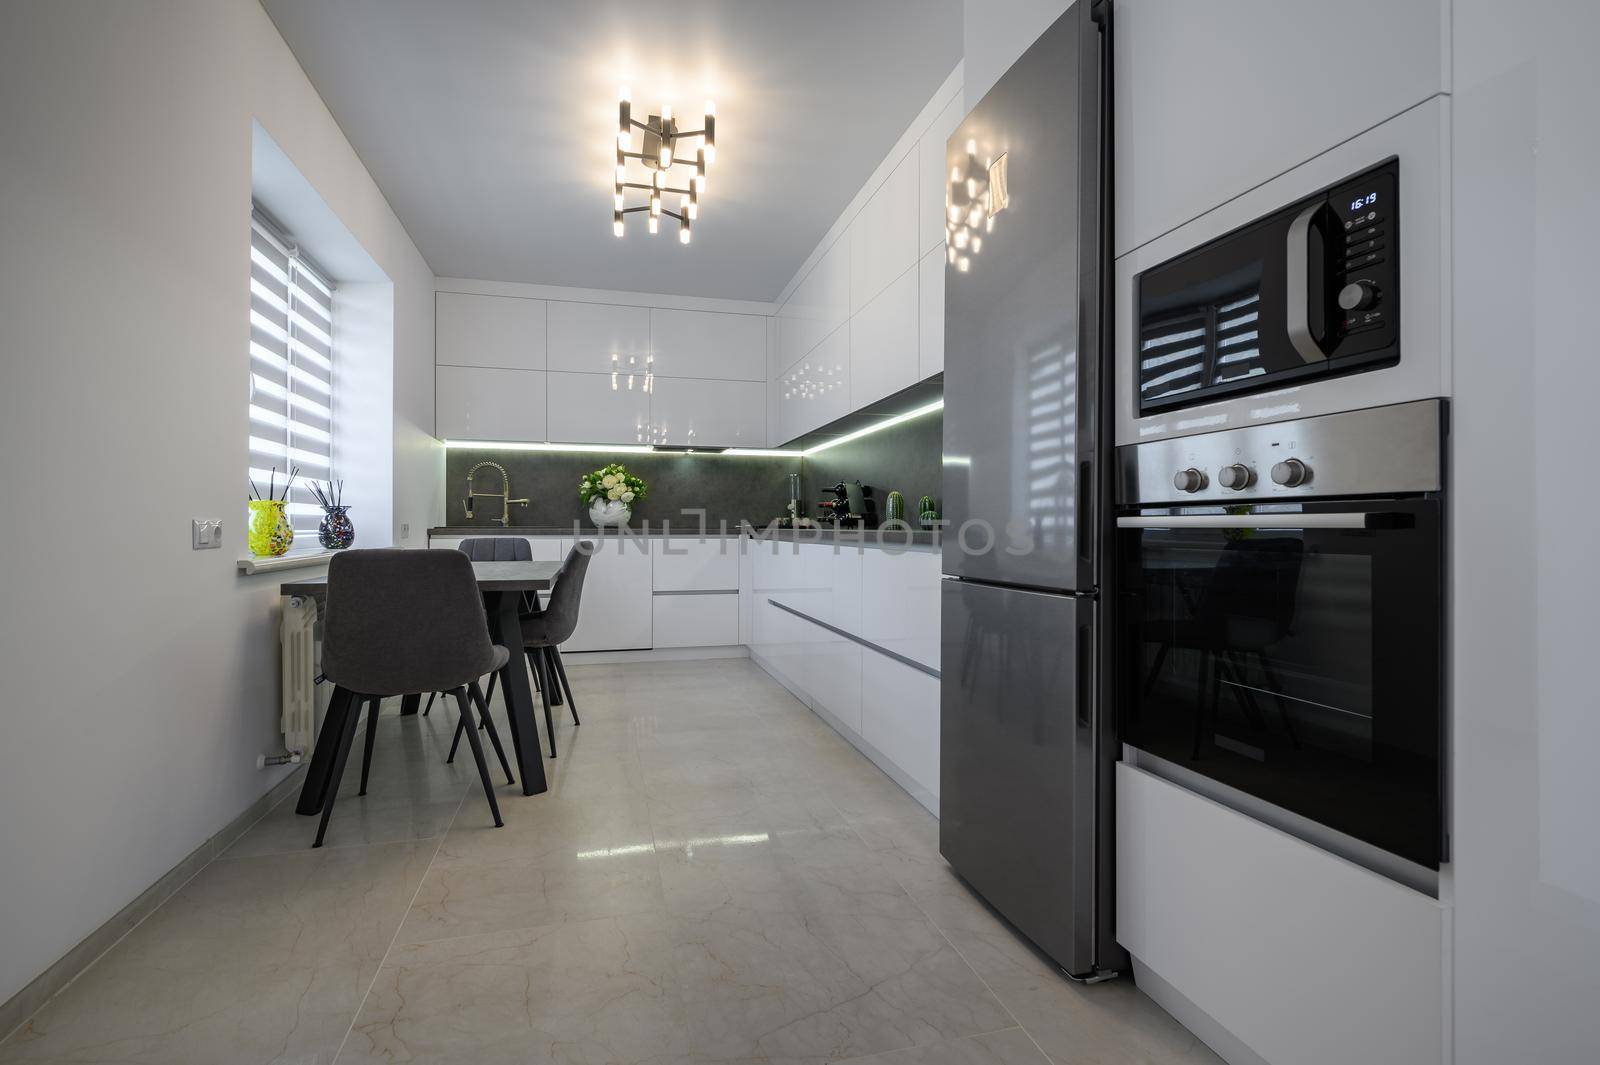 Luxurious modern trendy white and grey kitchen interior after renovation, with granite counter top and marble floor, dining table next to window